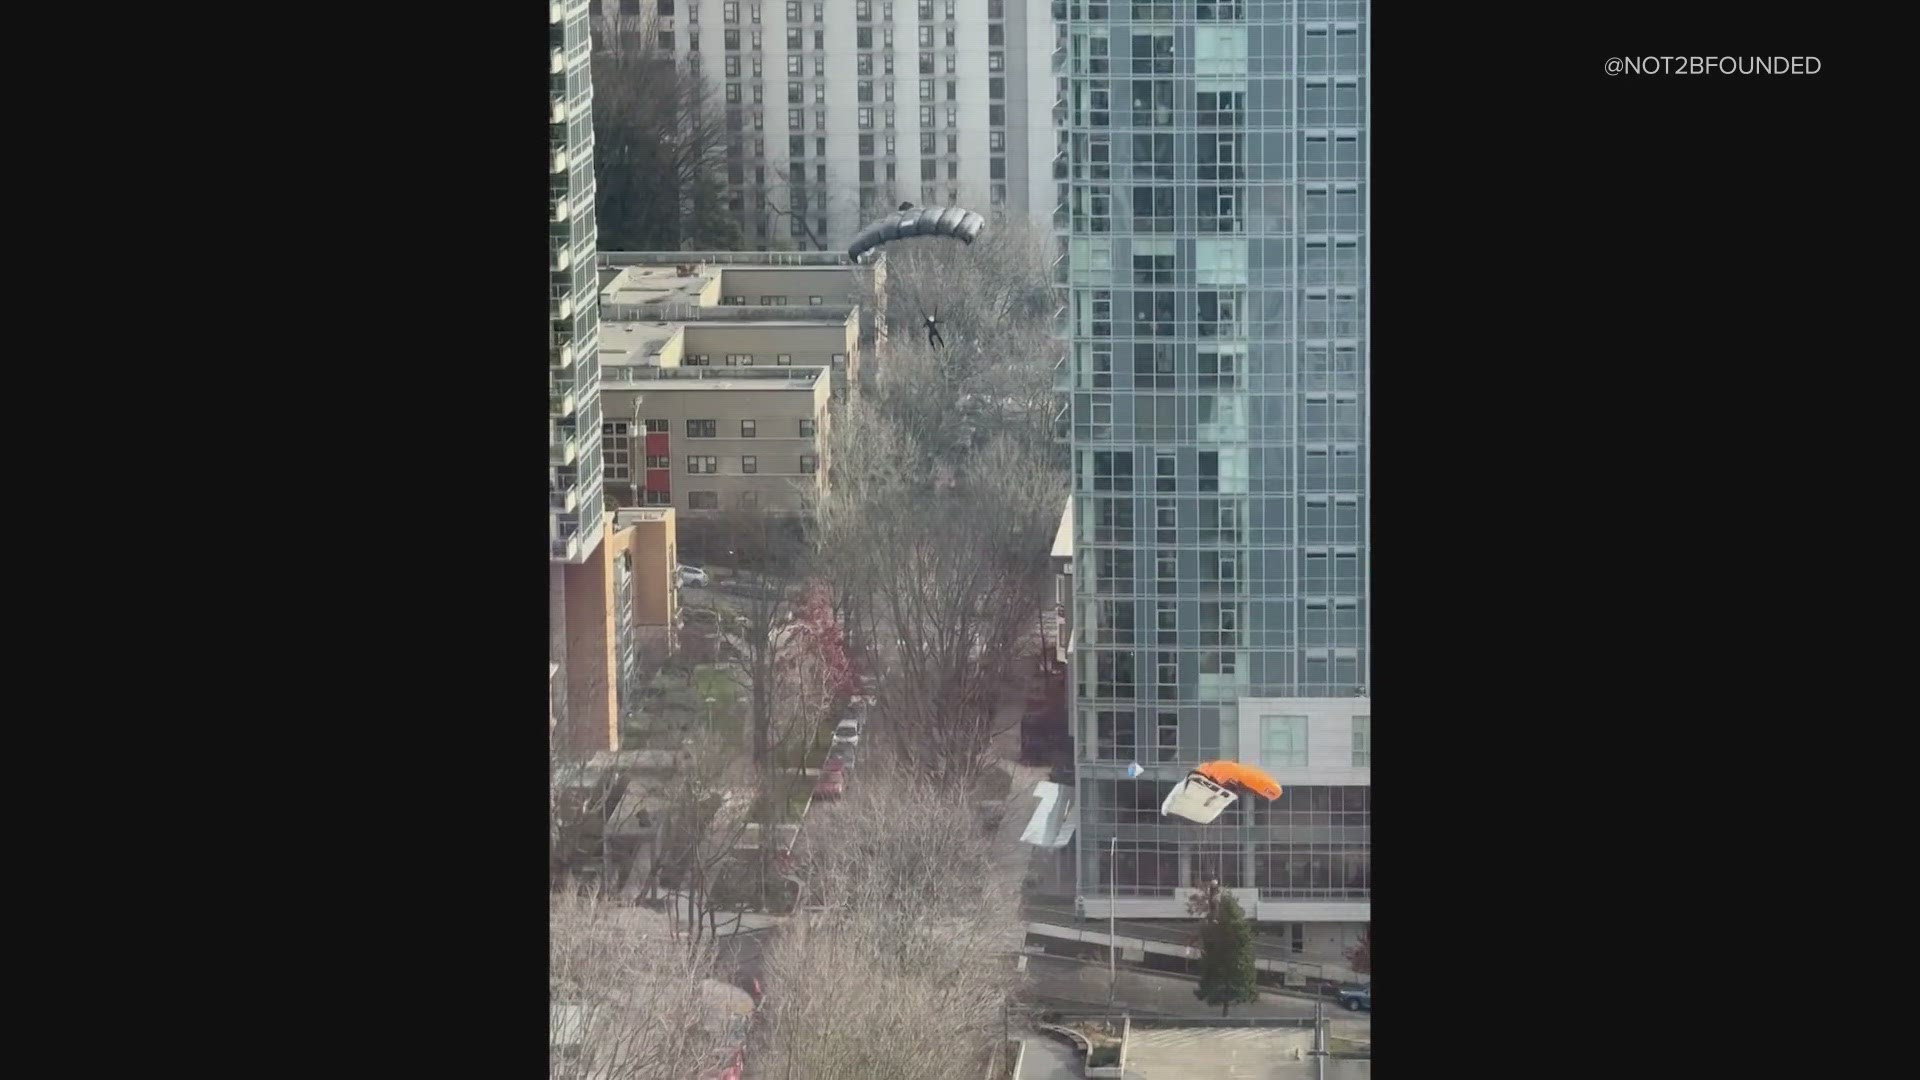 Base jumpers were caught in the act in Seattle’s First Hill Neighborhood and now police and building management are asking questions.